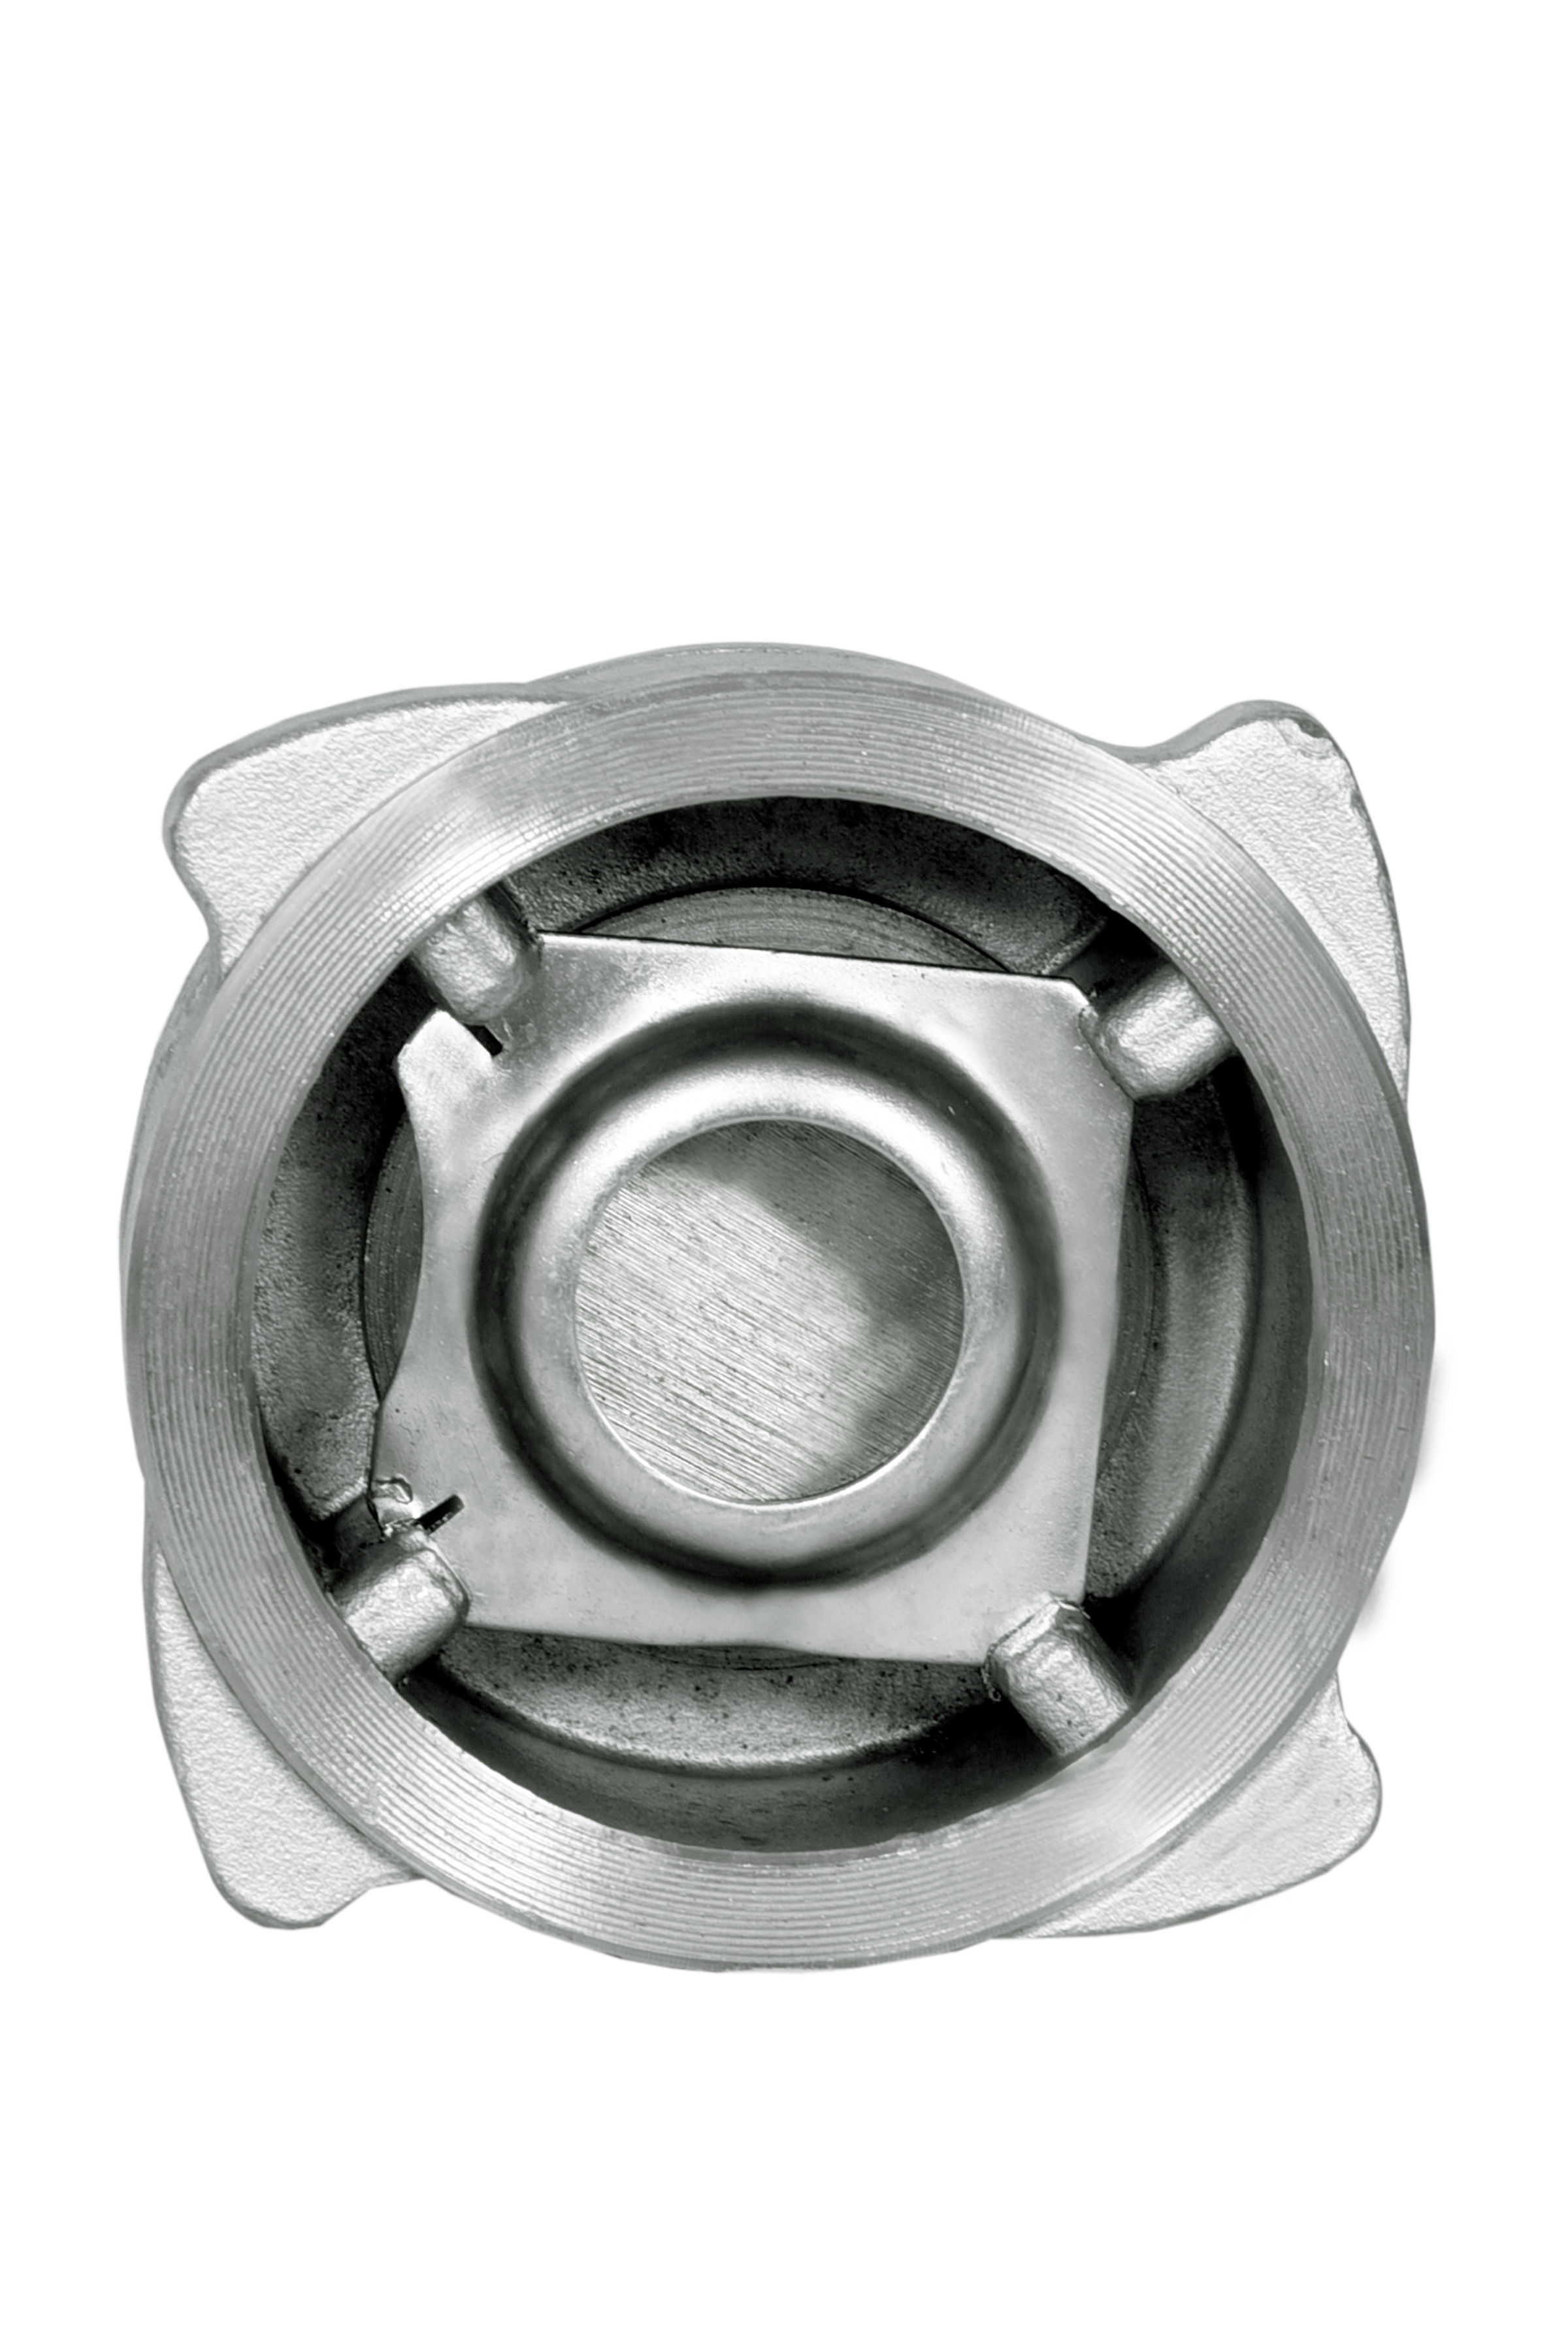 SS Disk Check Valve Manufacturers In Rajasthan